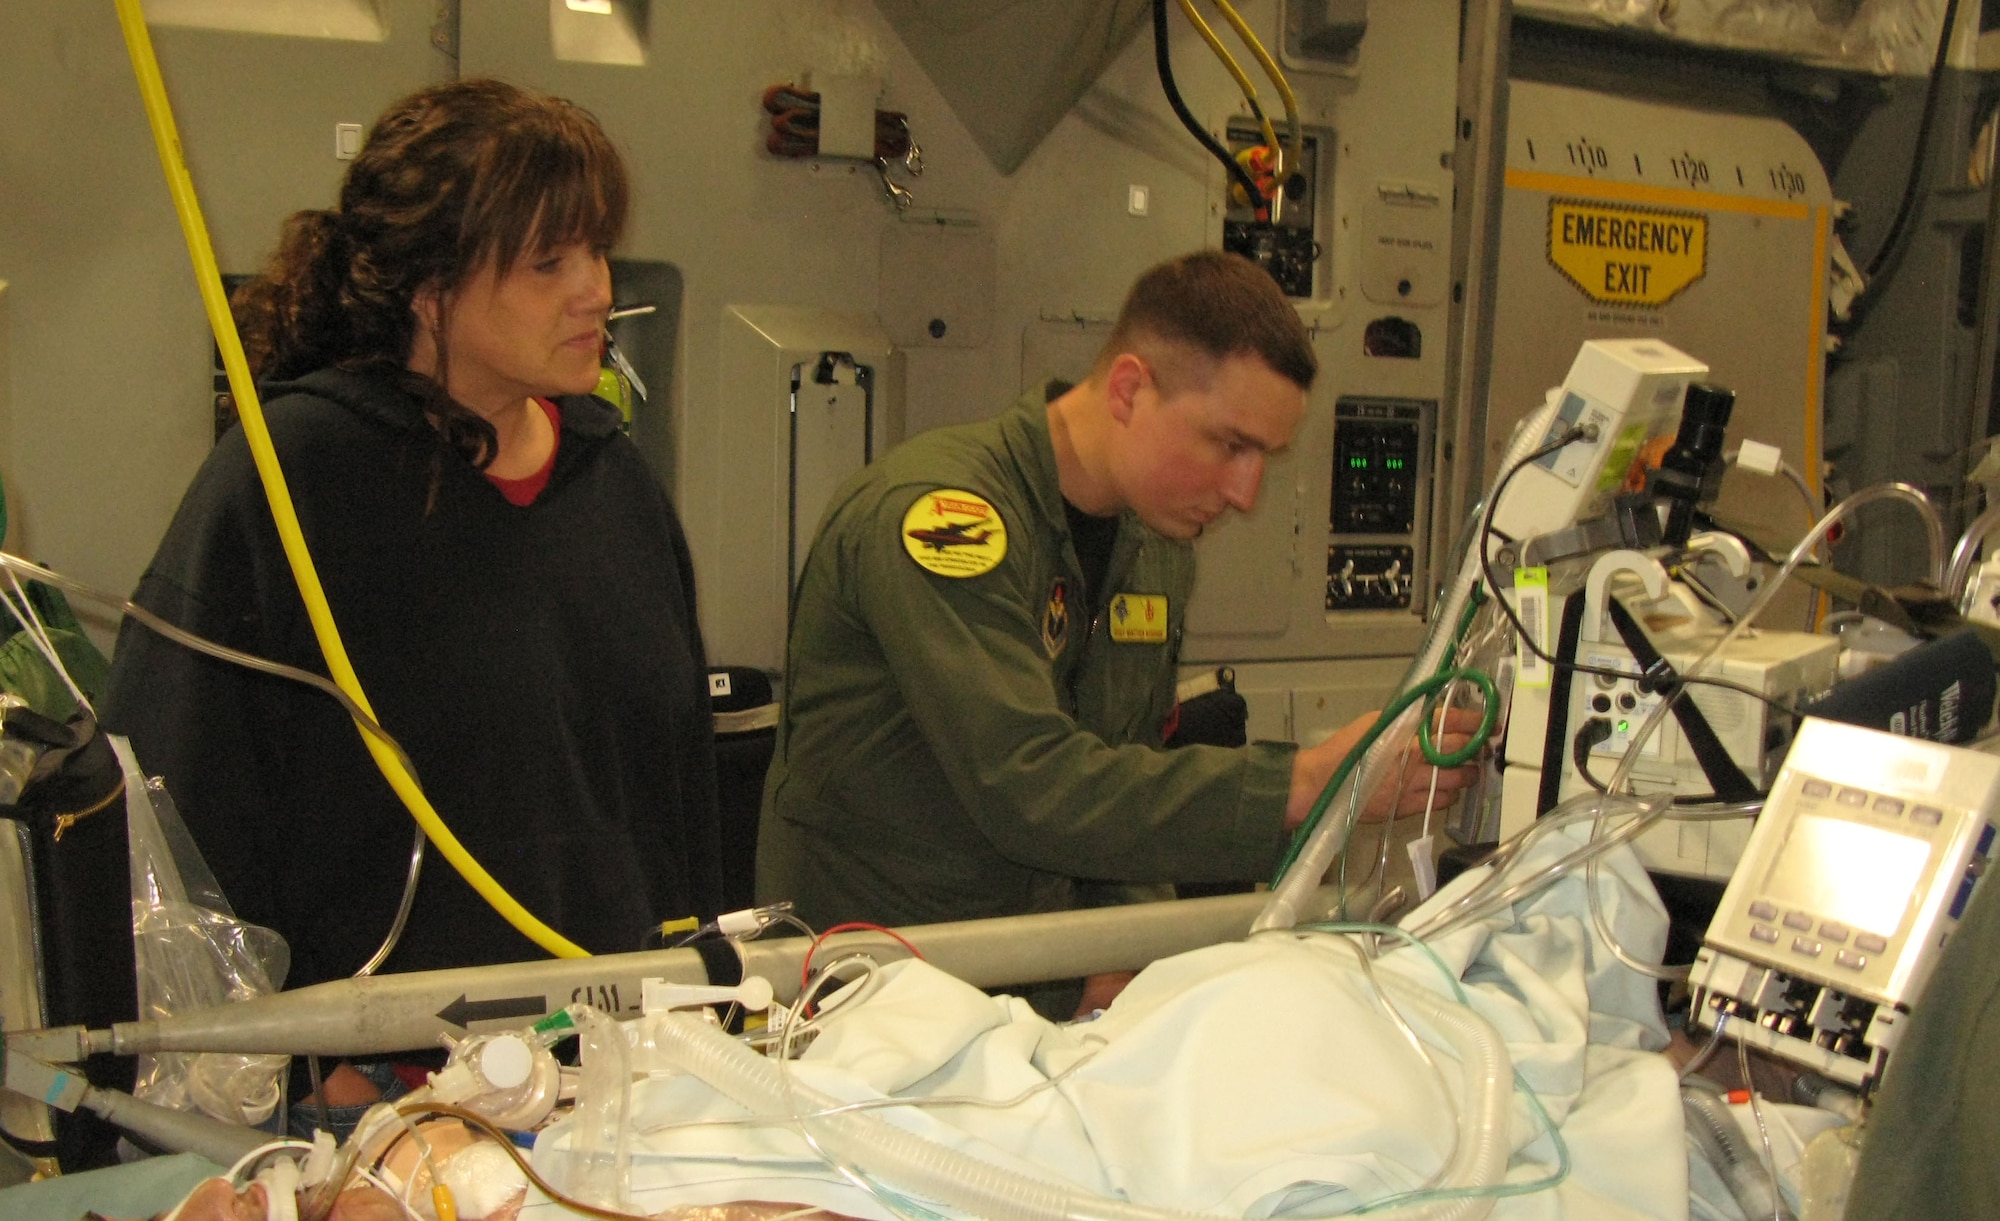 Kelli Pedersen looks on as Staff Sgt. Matthew Worsham, a respiratory technician with the critical care air transport team, prepares her son, Army Spc. Dustin Morrison, for an aeromedical evacuation flight from Ramstein Air Base, Germany, April 26, 2011, for follow-on care at Walter Reed Army Medical Center in Washington, D.C. (Defense Department photo/Donna Miles )